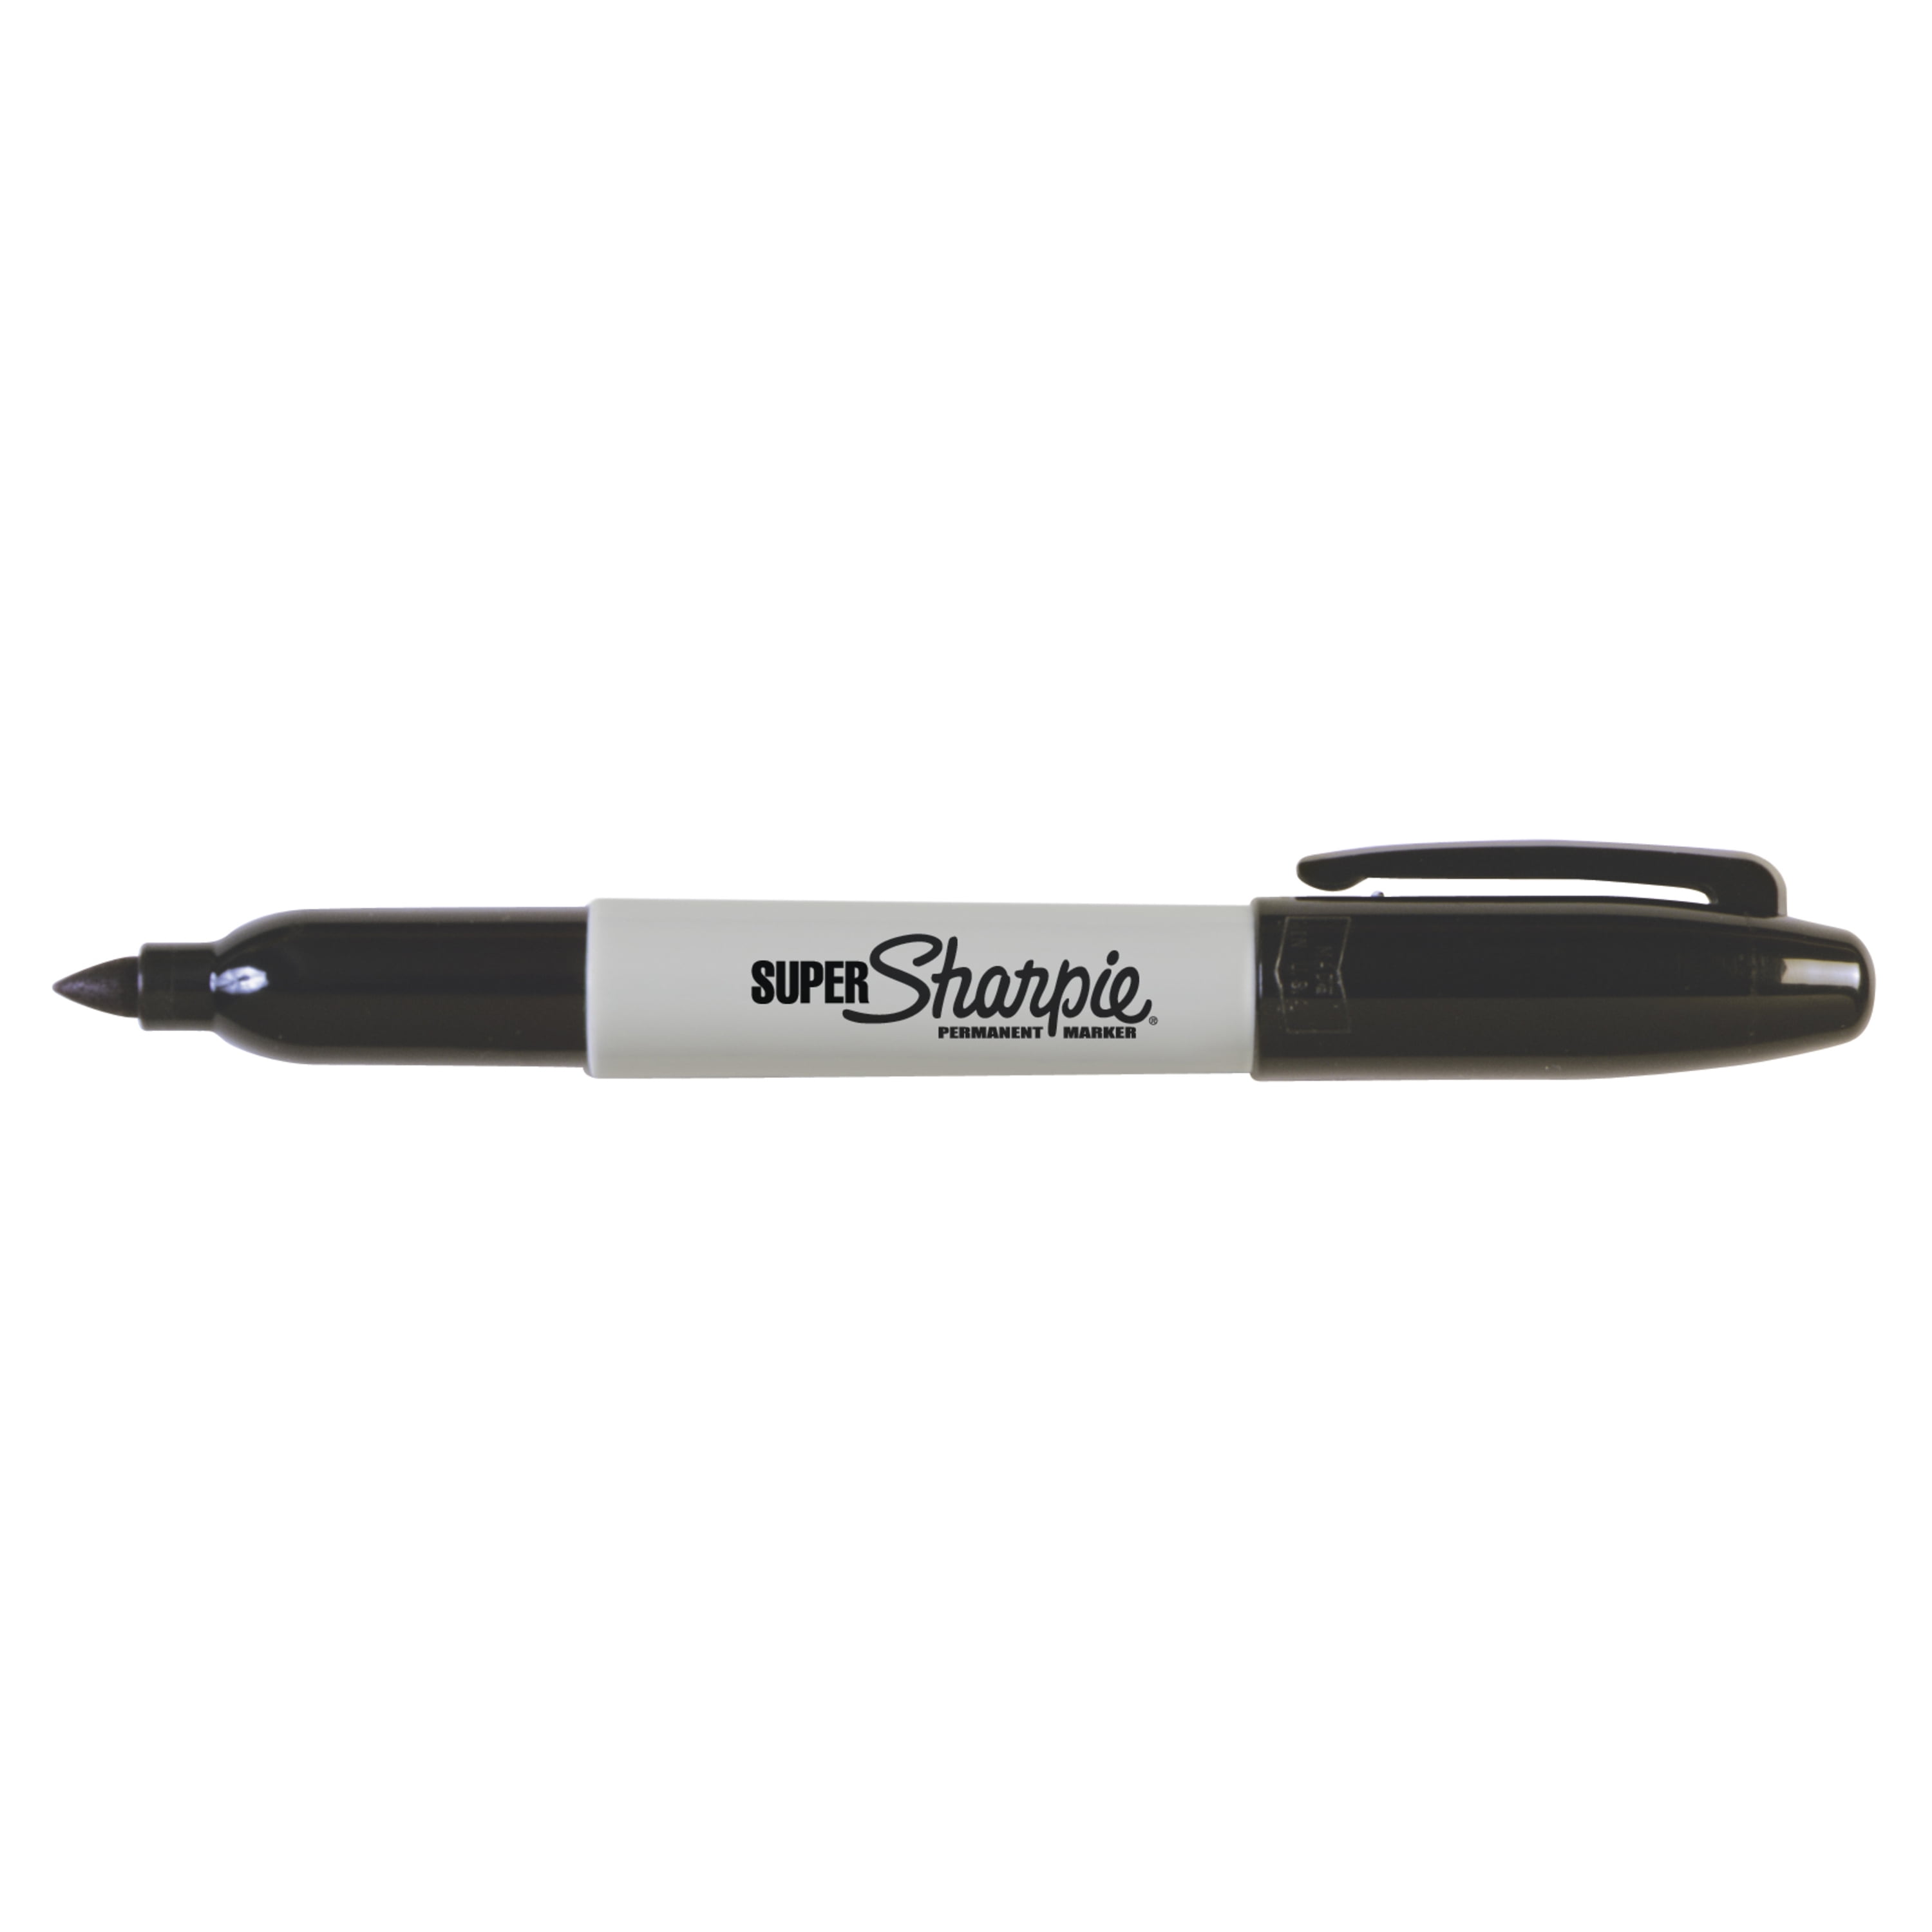 Sharpie Fine Point Black Permanent Marker (12 per Pack) 2005126 - The Home  Depot